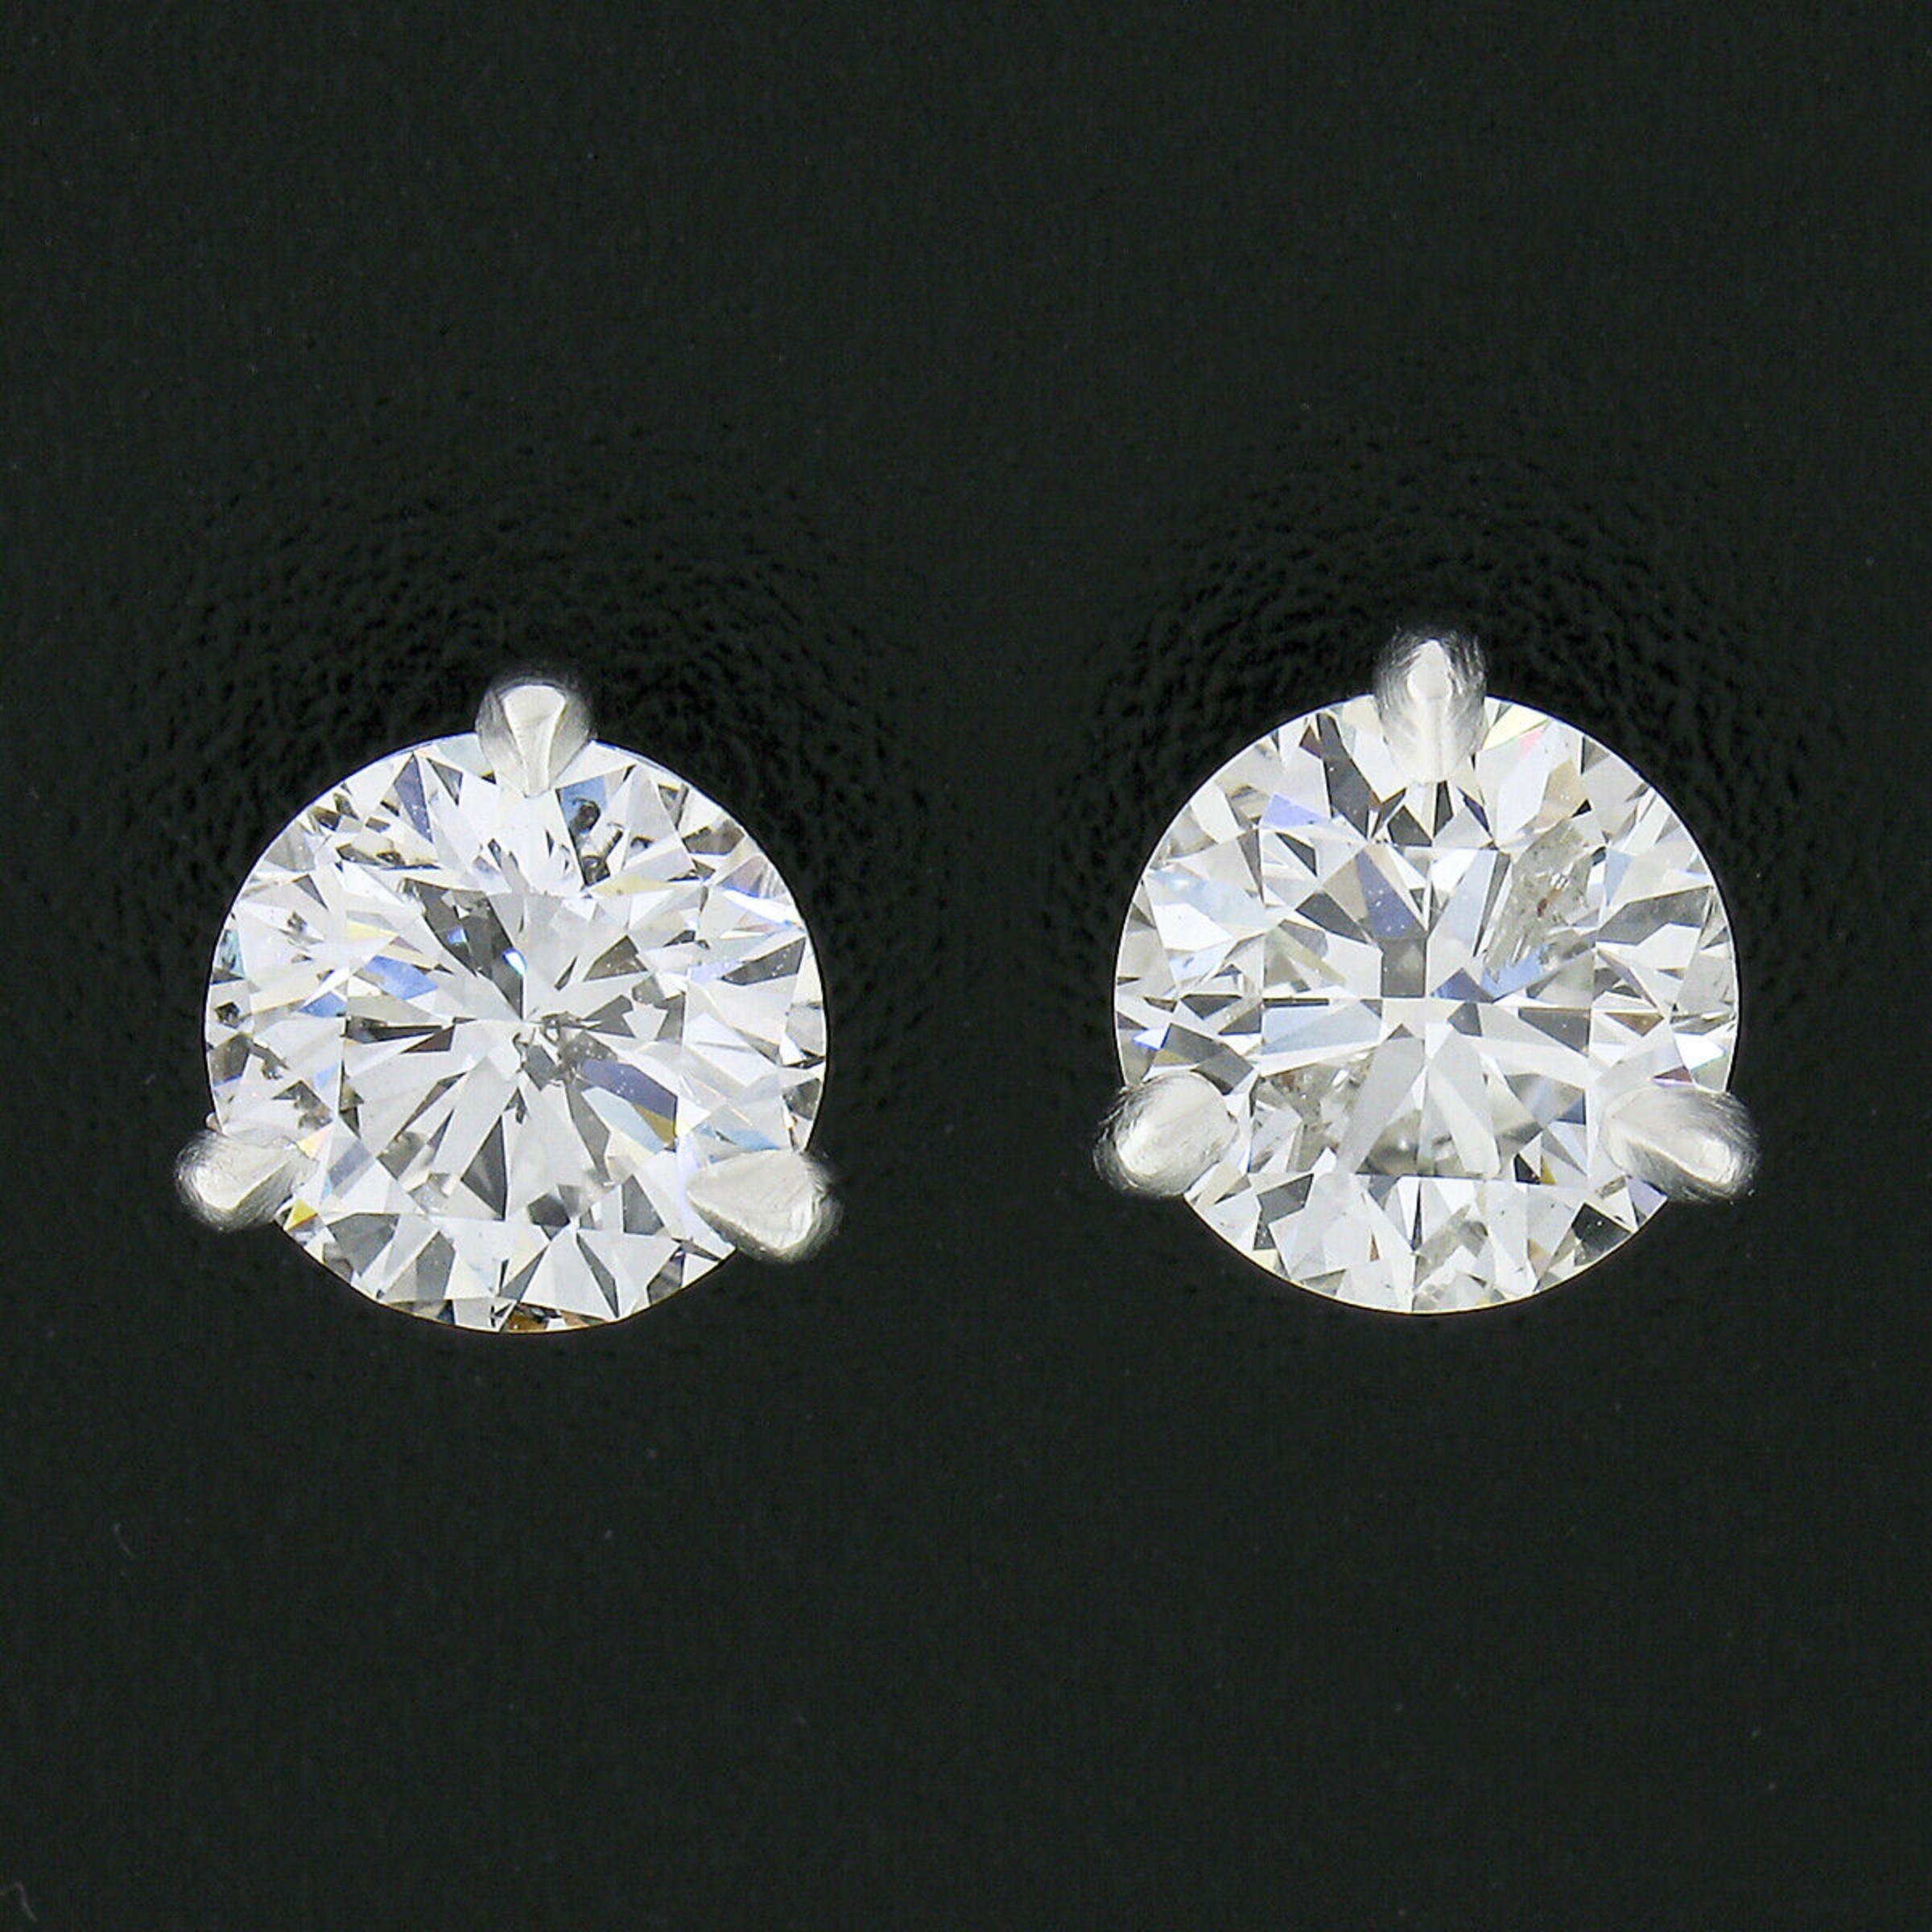 This stunning pair of diamond stud earrings was newly crafted from solid 950 platinum and features two exceptionally brilliant and fiery GIA certified round brilliant diamonds. The diamonds total exactly 2.05 carats in weight (each weighing over 1